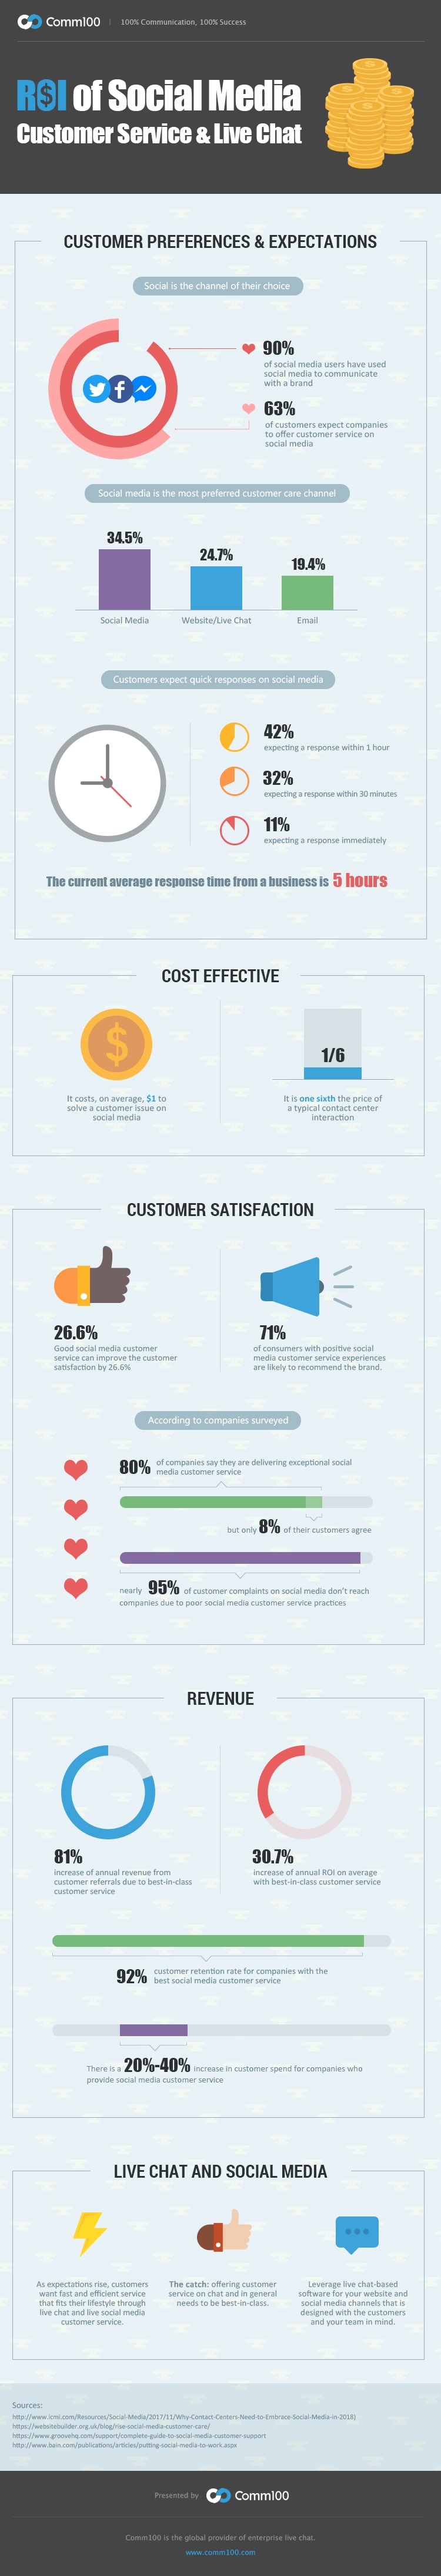 ROI of Social Media Customer Service & Live Chat [Infographic]